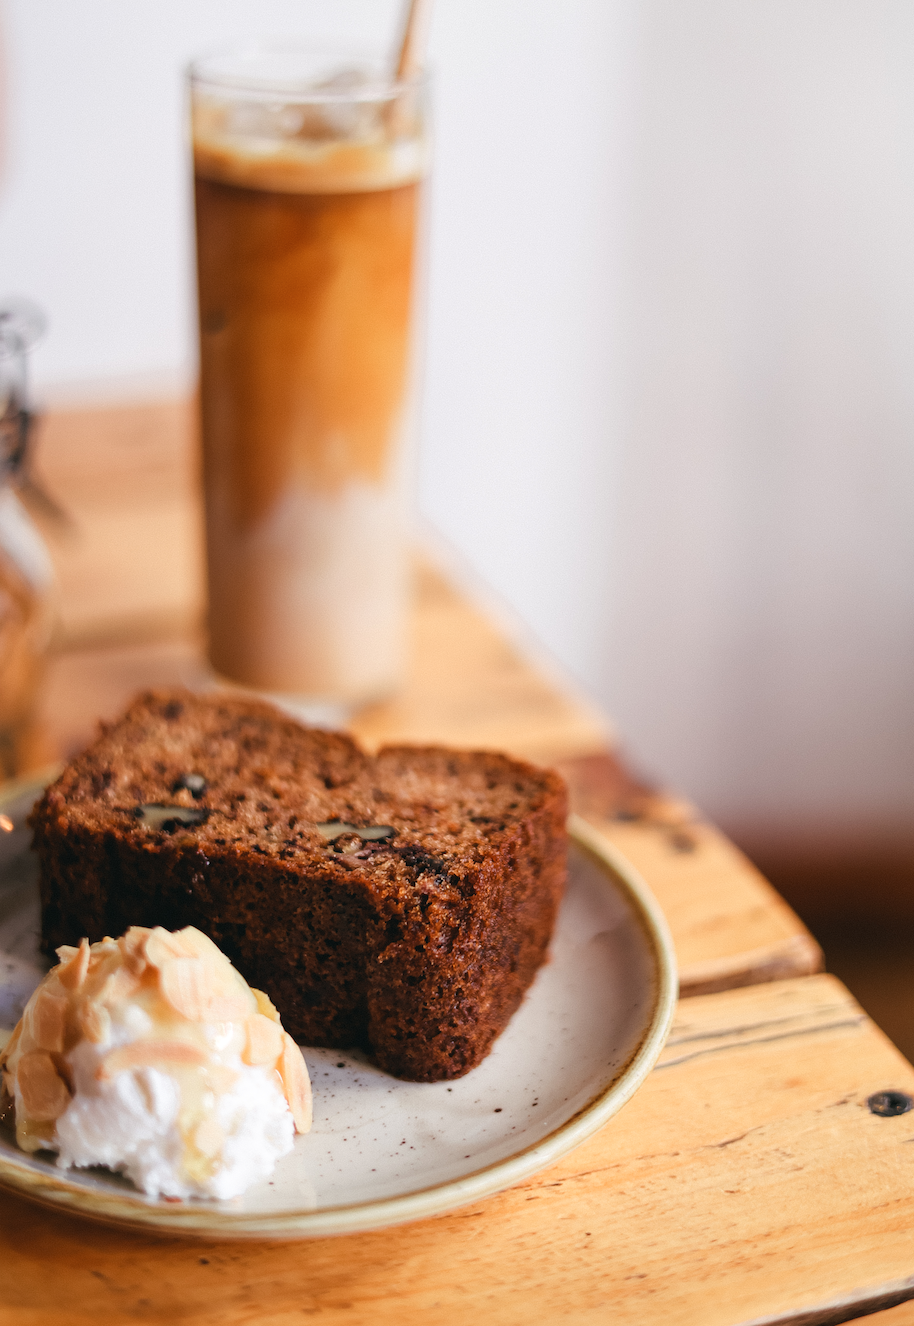 BANANA CAKE: Served with ricotta, almonds and honey